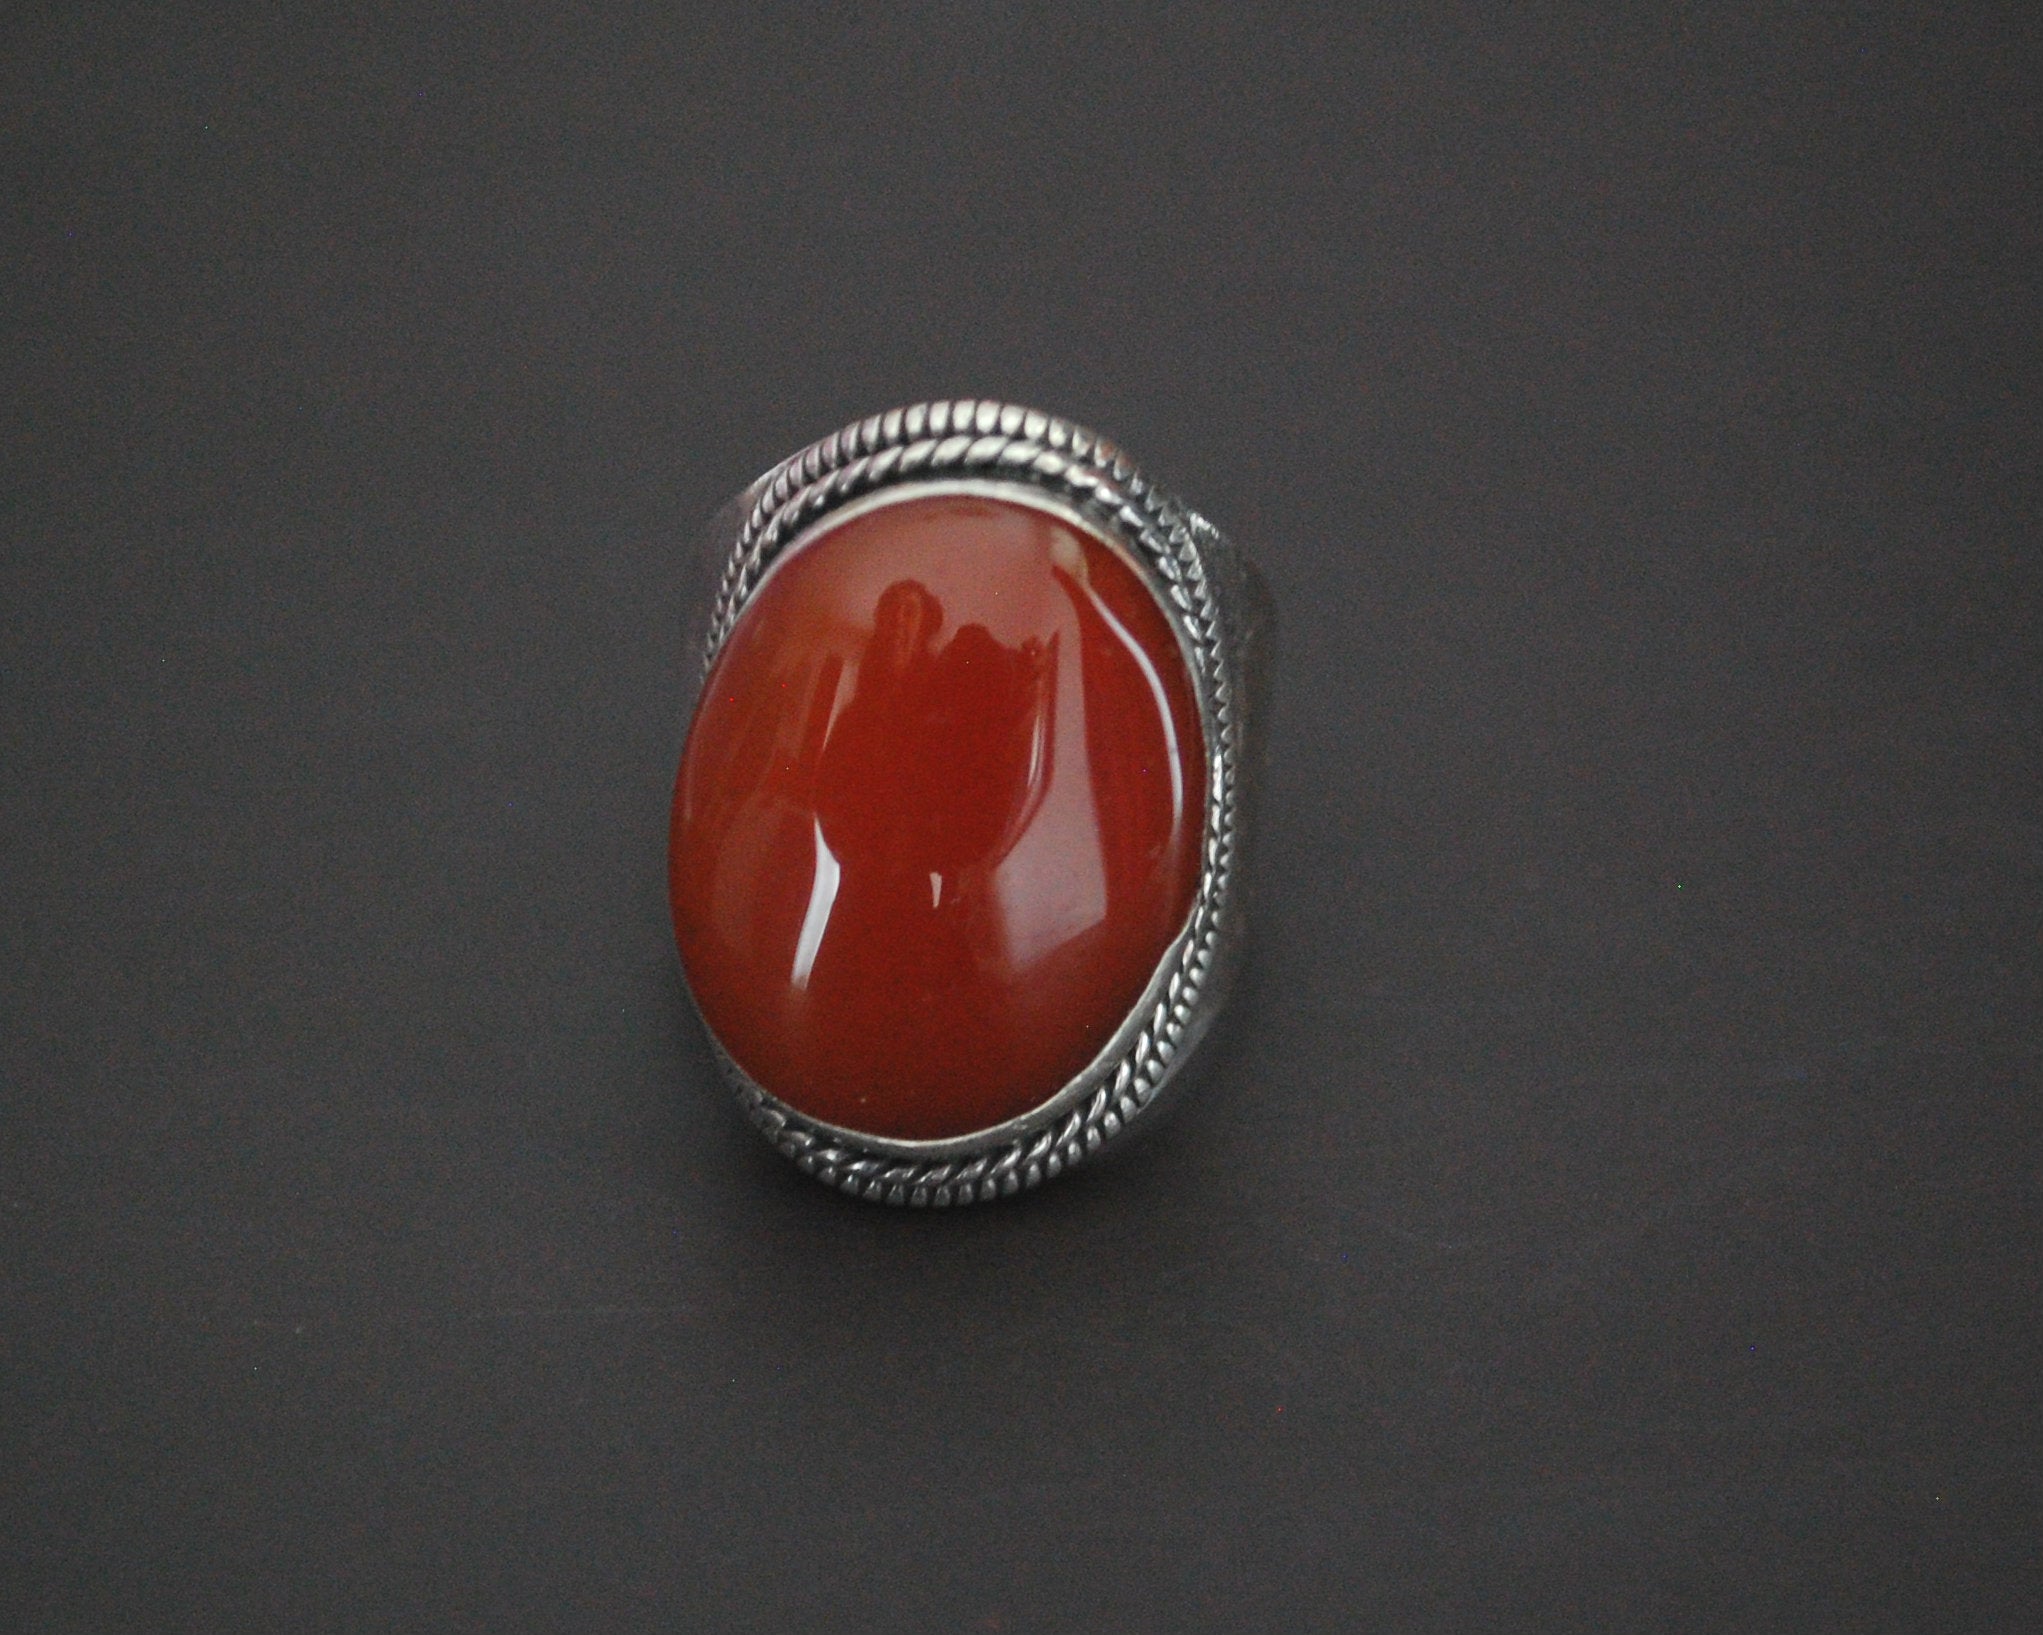 Large Carnelian Ring from India - Size 8